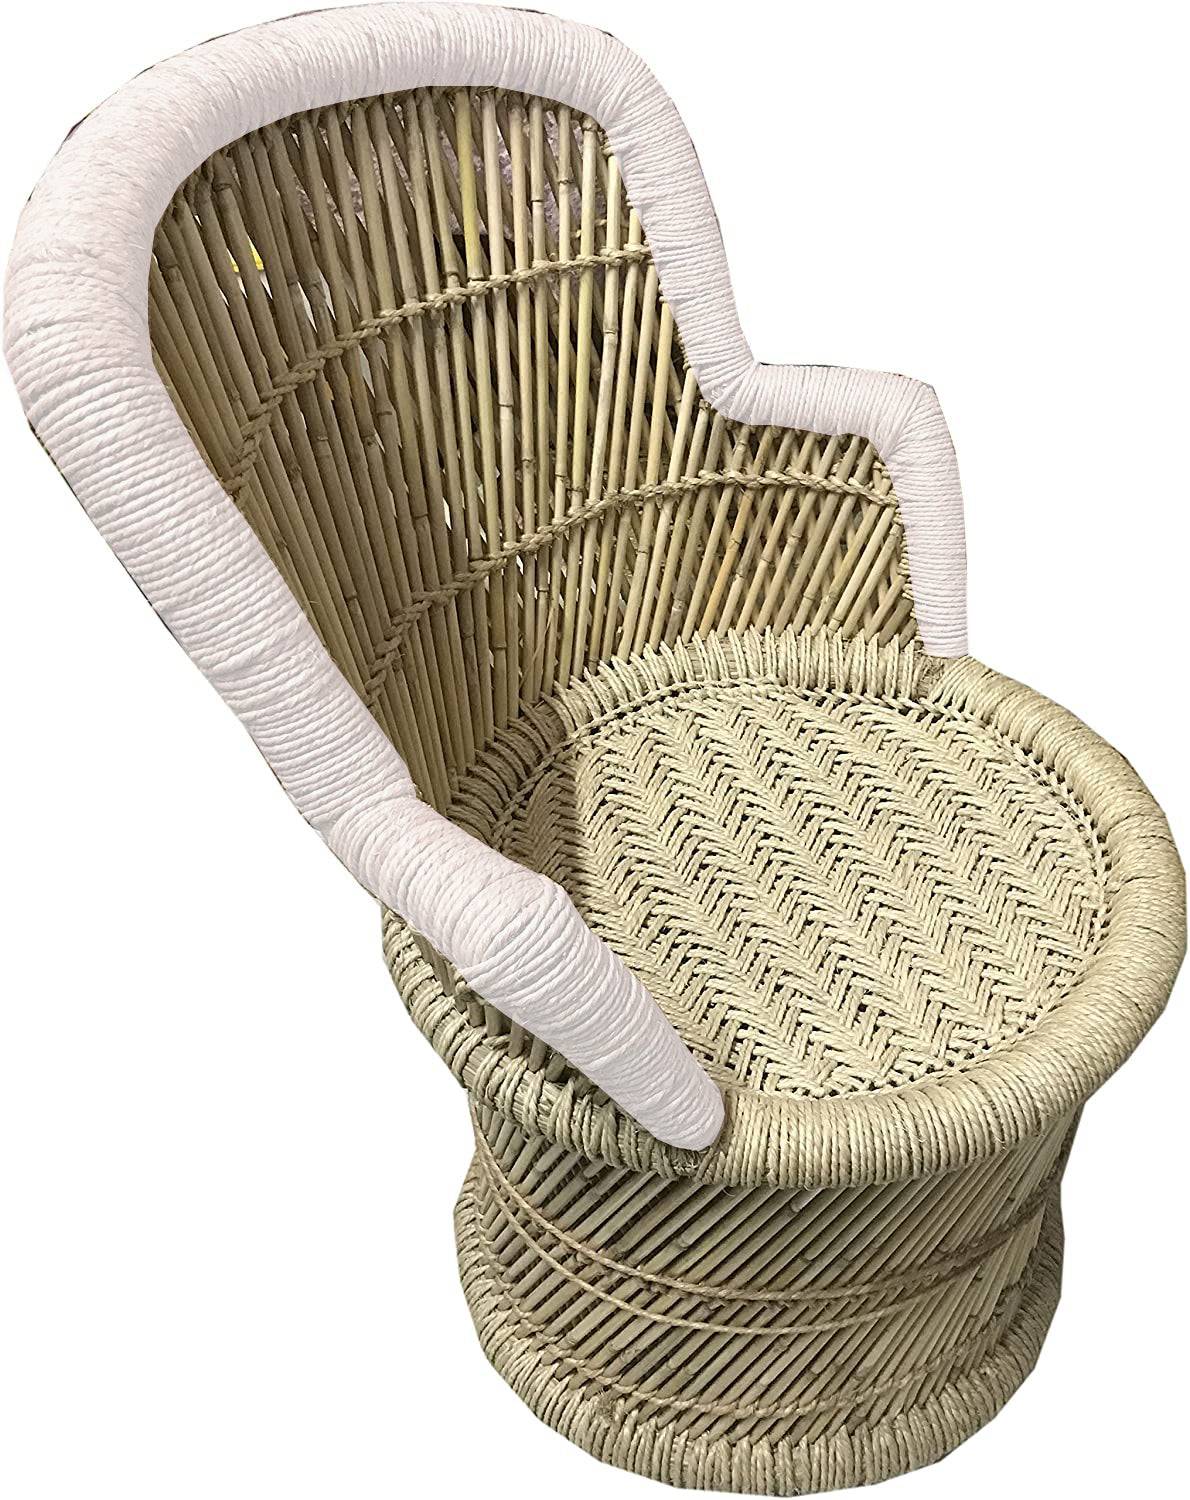 	 Kids Chair With White Weaving